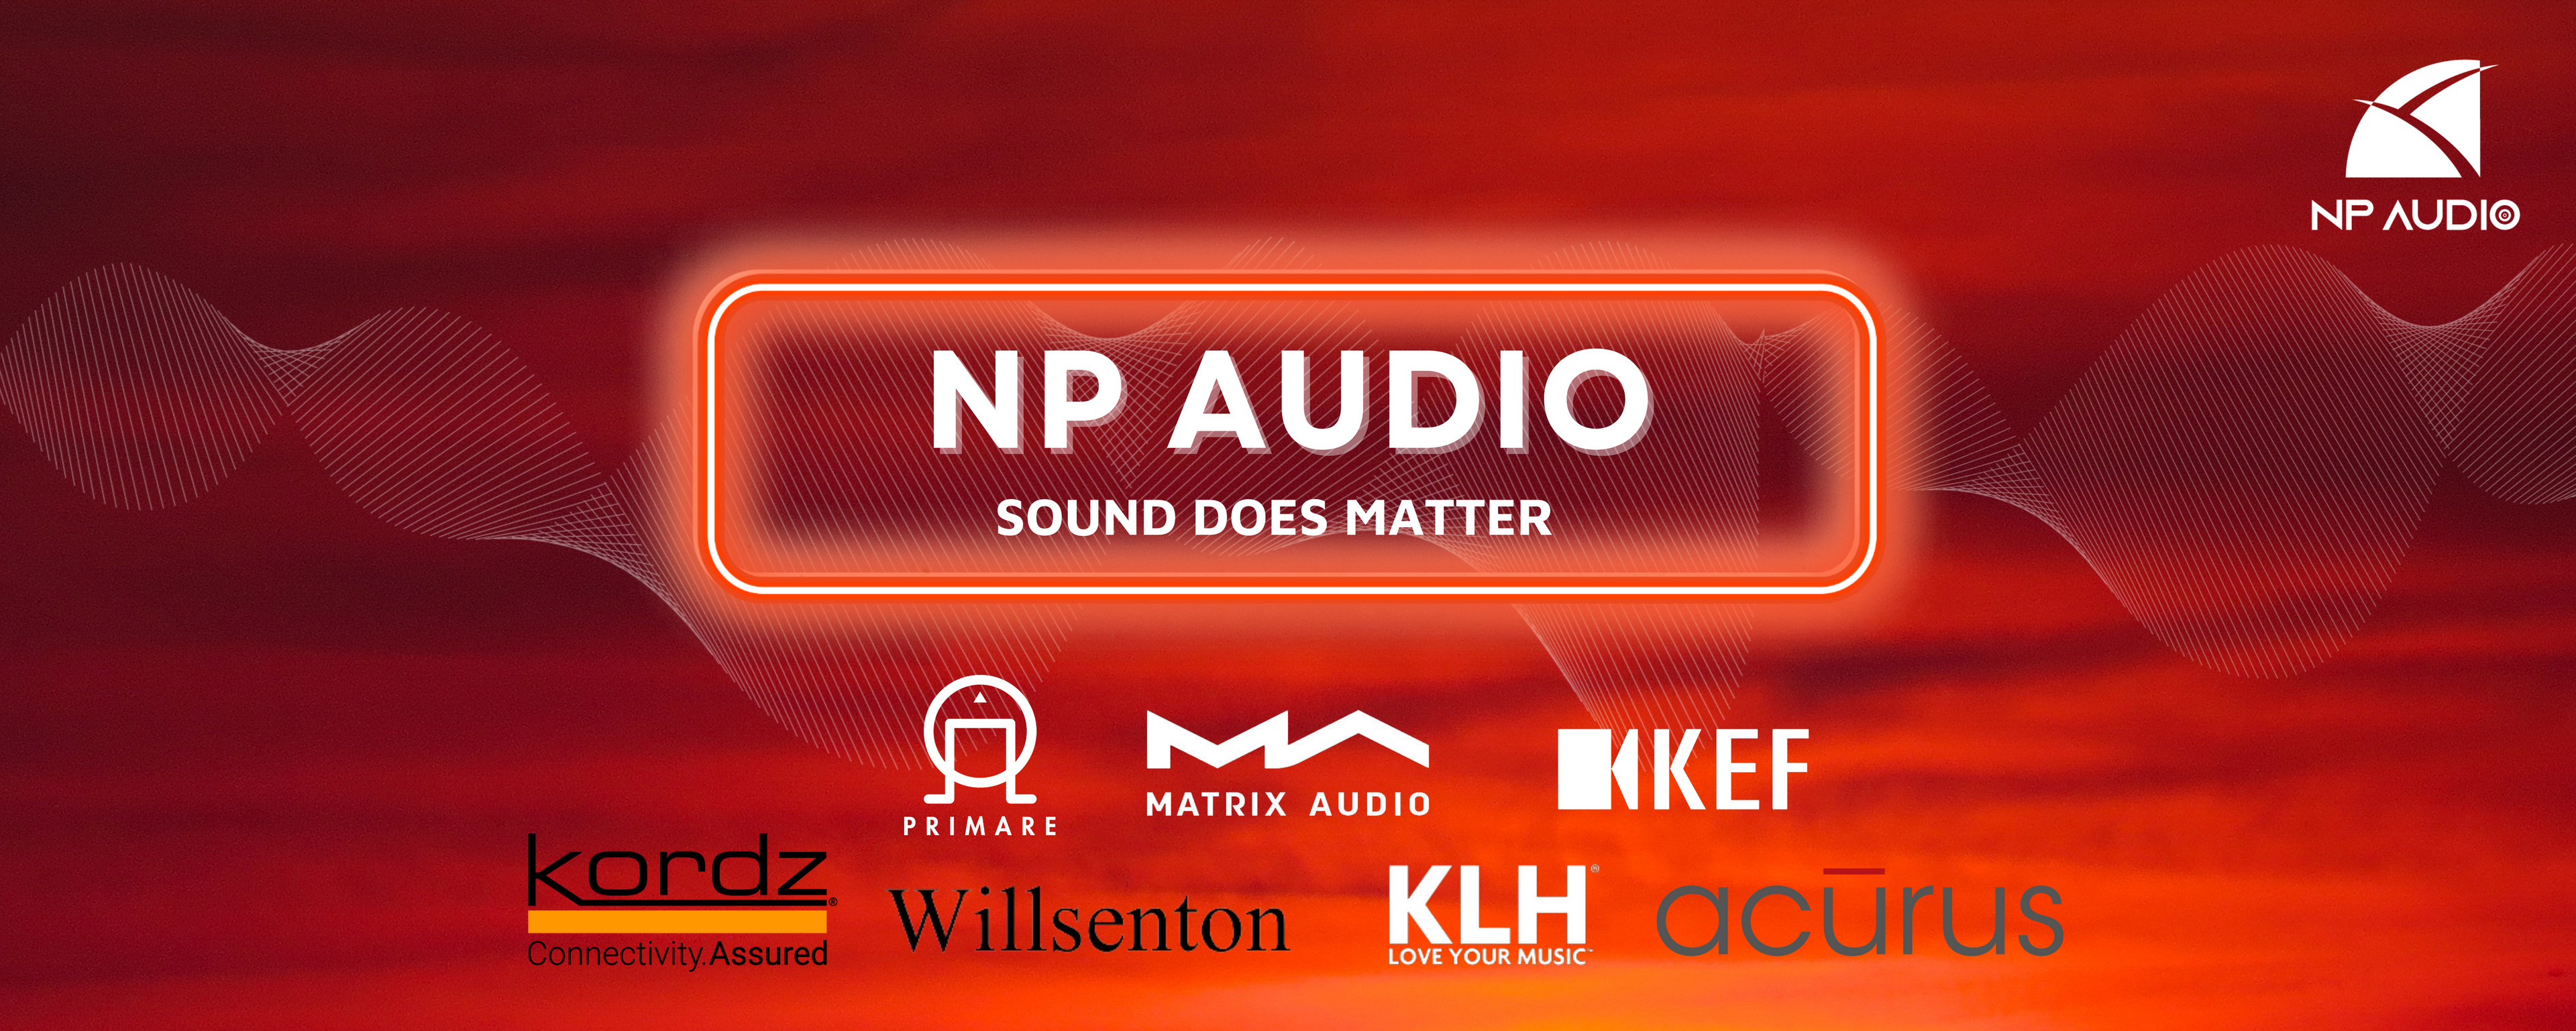 HK Audio products for sale